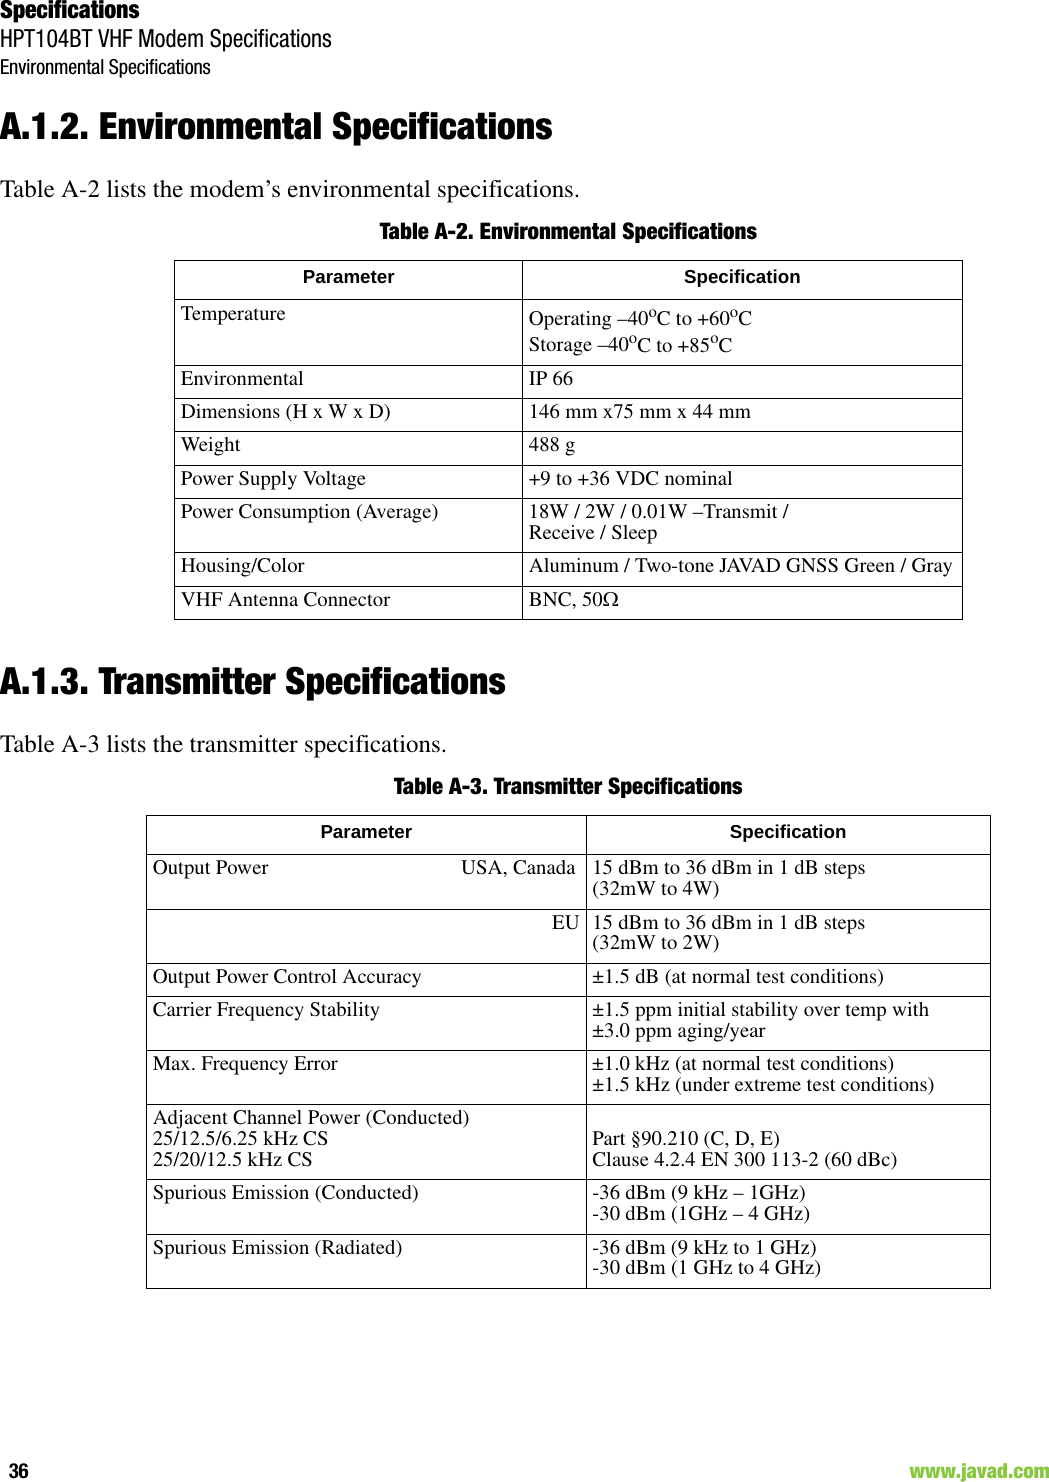 SpecificationsHPT104BT VHF Modem SpecificationsEnvironmental Specifications36                                                                                                                     www.javad.comA.1.2. Environmental SpecificationsTable A-2 lists the modem’s environmental specifications.Table A-2. Environmental SpecificationsA.1.3. Transmitter SpecificationsTable A-3 lists the transmitter specifications.Table A-3. Transmitter SpecificationsParameter SpecificationTemperature Operating –40oC to +60oCStorage –40oC to +85oCEnvironmental IP 66Dimensions (H x W x D) 146 mm x75 mm x 44 mmWeight 488 gPower Supply Voltage +9 to +36 VDC nominalPower Consumption (Average) 18W / 2W / 0.01W –Transmit / Receive / Sleep Housing/Color Aluminum / Two-tone JAVAD GNSS Green / GrayVHF Antenna Connector BNC, 50Parameter SpecificationOutput Power                                     USA, Canada 15 dBm to 36 dBm in 1 dB steps(32mW to 4W)EU 15 dBm to 36 dBm in 1 dB steps(32mW to 2W)Output Power Control Accuracy ±1.5 dB (at normal test conditions)Carrier Frequency Stability ±1.5 ppm initial stability over temp with±3.0 ppm aging/yearMax. Frequency Error ±1.0 kHz (at normal test conditions)±1.5 kHz (under extreme test conditions)Adjacent Channel Power (Conducted)25/12.5/6.25 kHz CS         25/20/12.5 kHz CS  Part §90.210 (C, D, E)Clause 4.2.4 EN 300 113-2 (60 dBc)Spurious Emission (Conducted) -36 dBm (9 kHz – 1GHz) -30 dBm (1GHz – 4 GHz)Spurious Emission (Radiated) -36 dBm (9 kHz to 1 GHz)-30 dBm (1 GHz to 4 GHz)